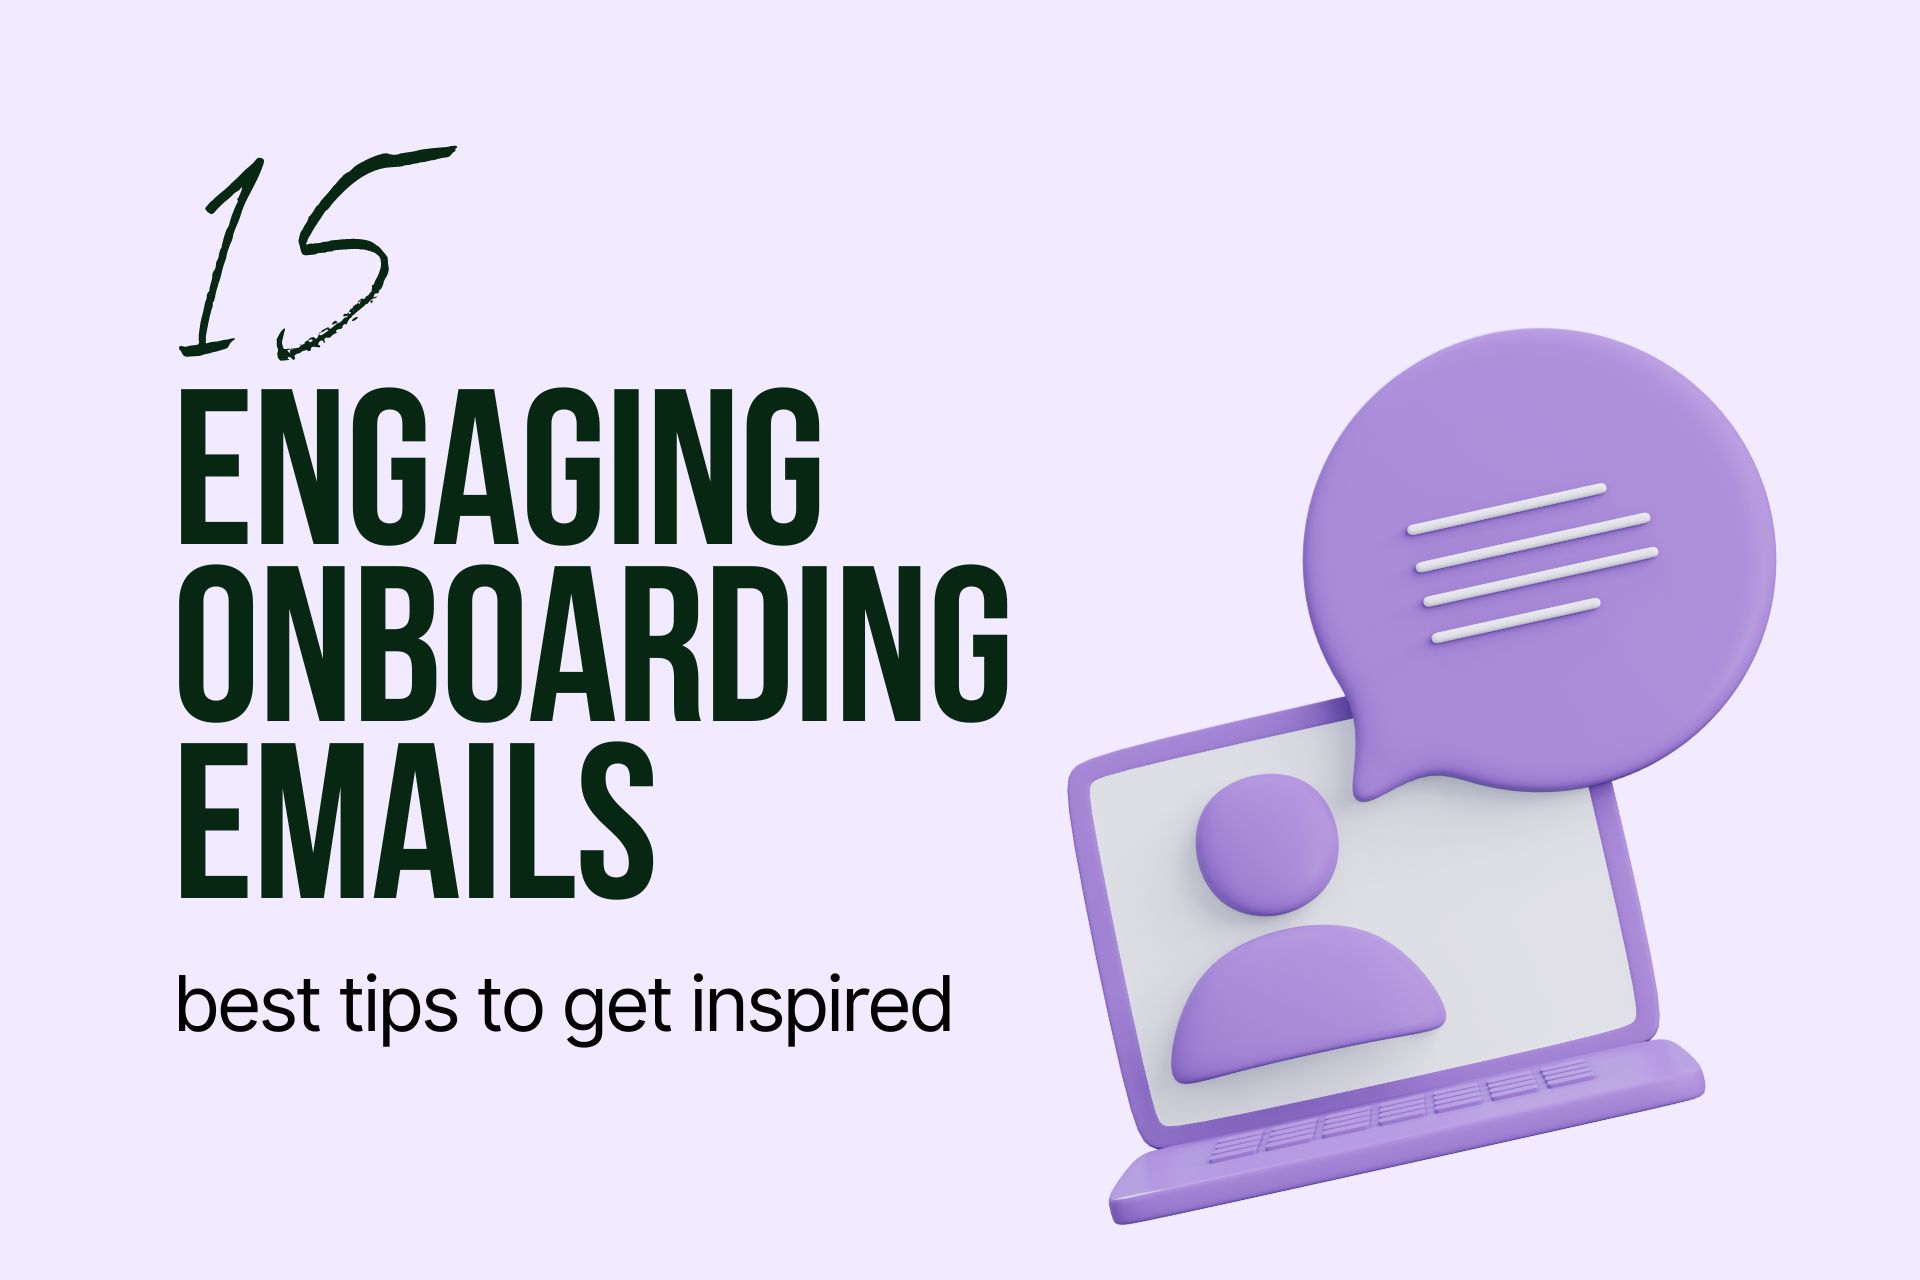 15 Engaging Onboarding Emails: Best Tips & Practices